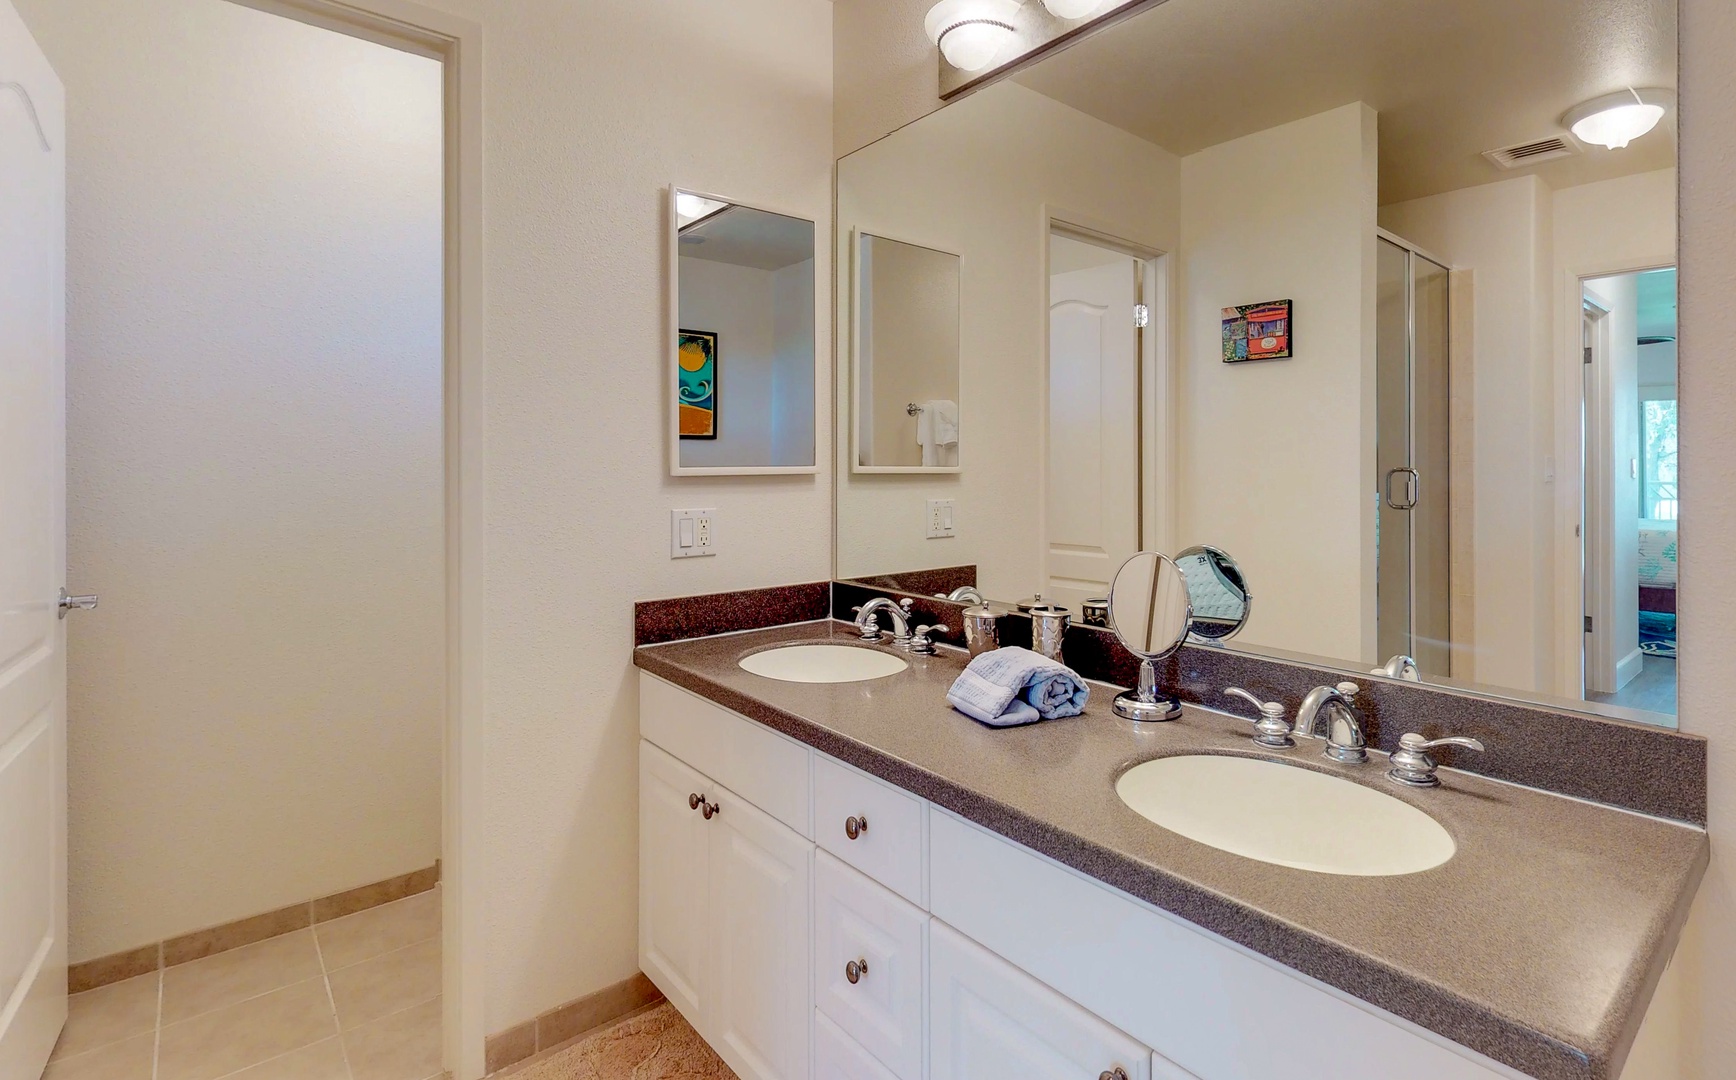 Kapolei Vacation Rentals, Ko Olina Kai 1051D - The primary guest bathroom with a large double vanity.